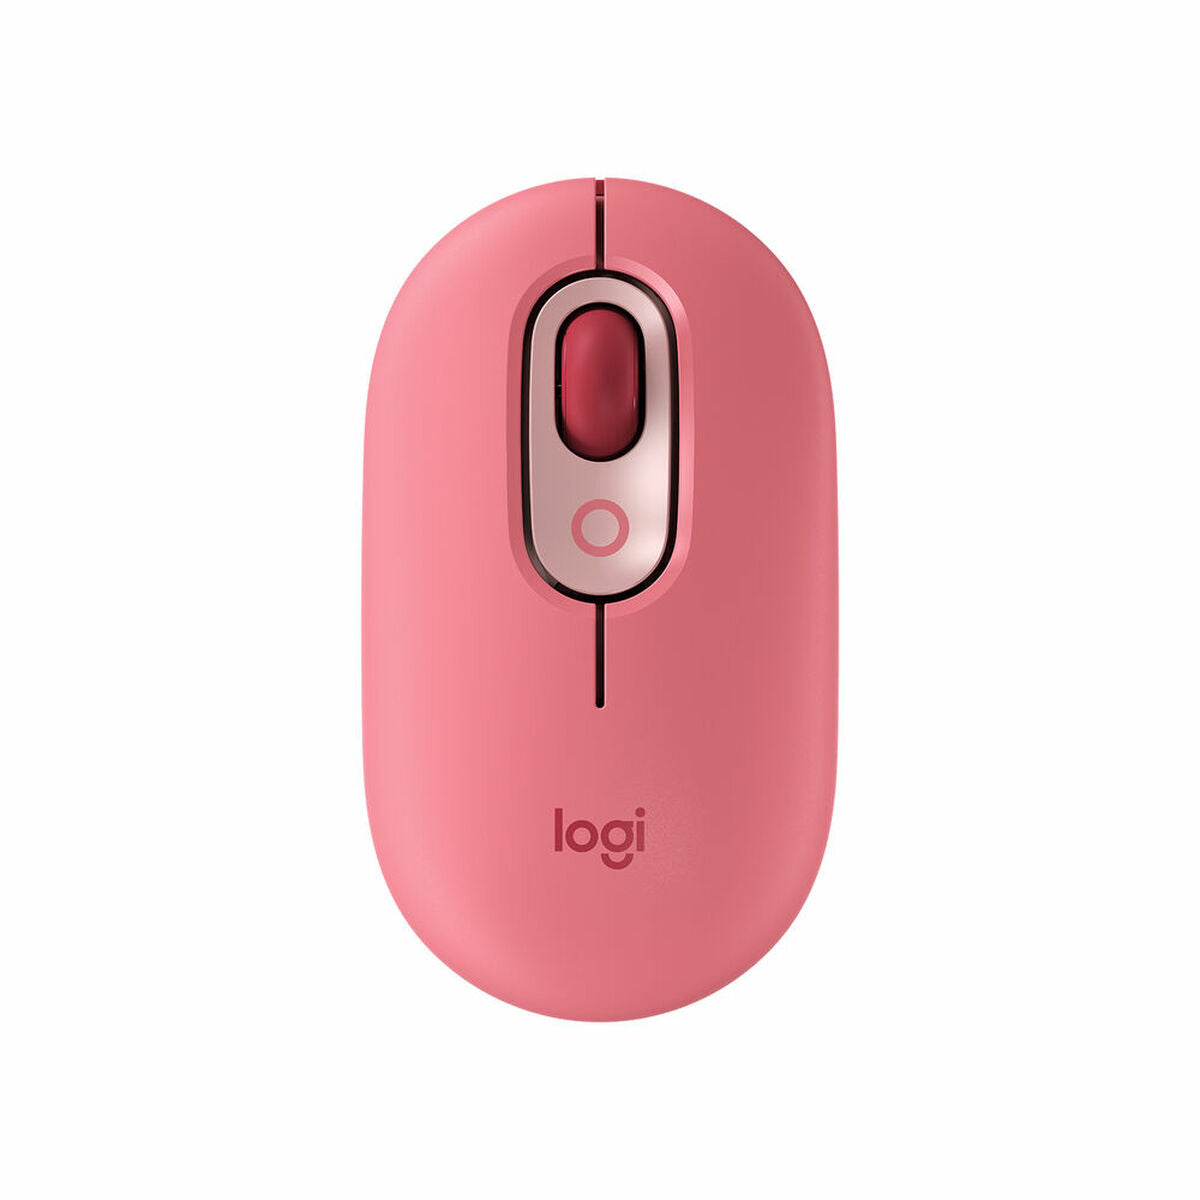 Mouse Logitech POP Mouse with emoji Pink, Logitech, Computing, Accessories, mouse-logitech-pop-mouse-with-emoji-pink, Brand_Logitech, category-reference-2609, category-reference-2642, category-reference-2656, category-reference-t-19685, category-reference-t-19908, category-reference-t-21353, computers / peripherals, Condition_NEW, office, Price_50 - 100, Teleworking, RiotNook